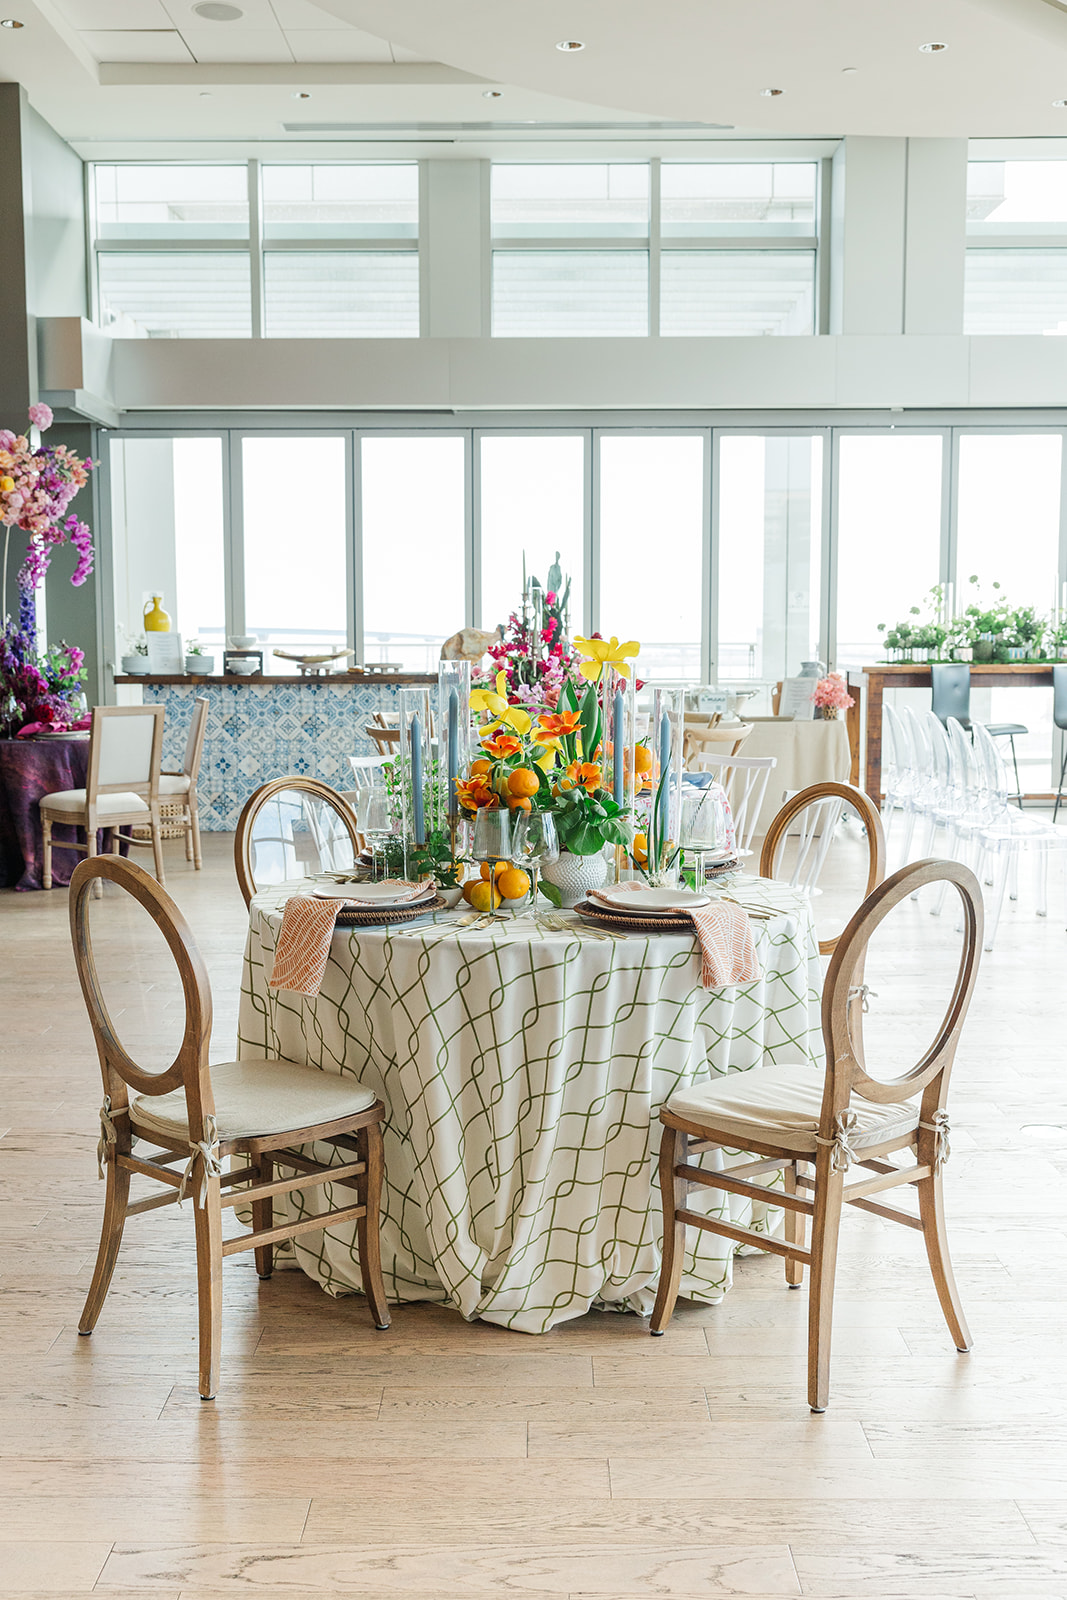 Linens by BBJ La Tavola, decore by Bright and TBD, florals and center pieces by Parker and Posies